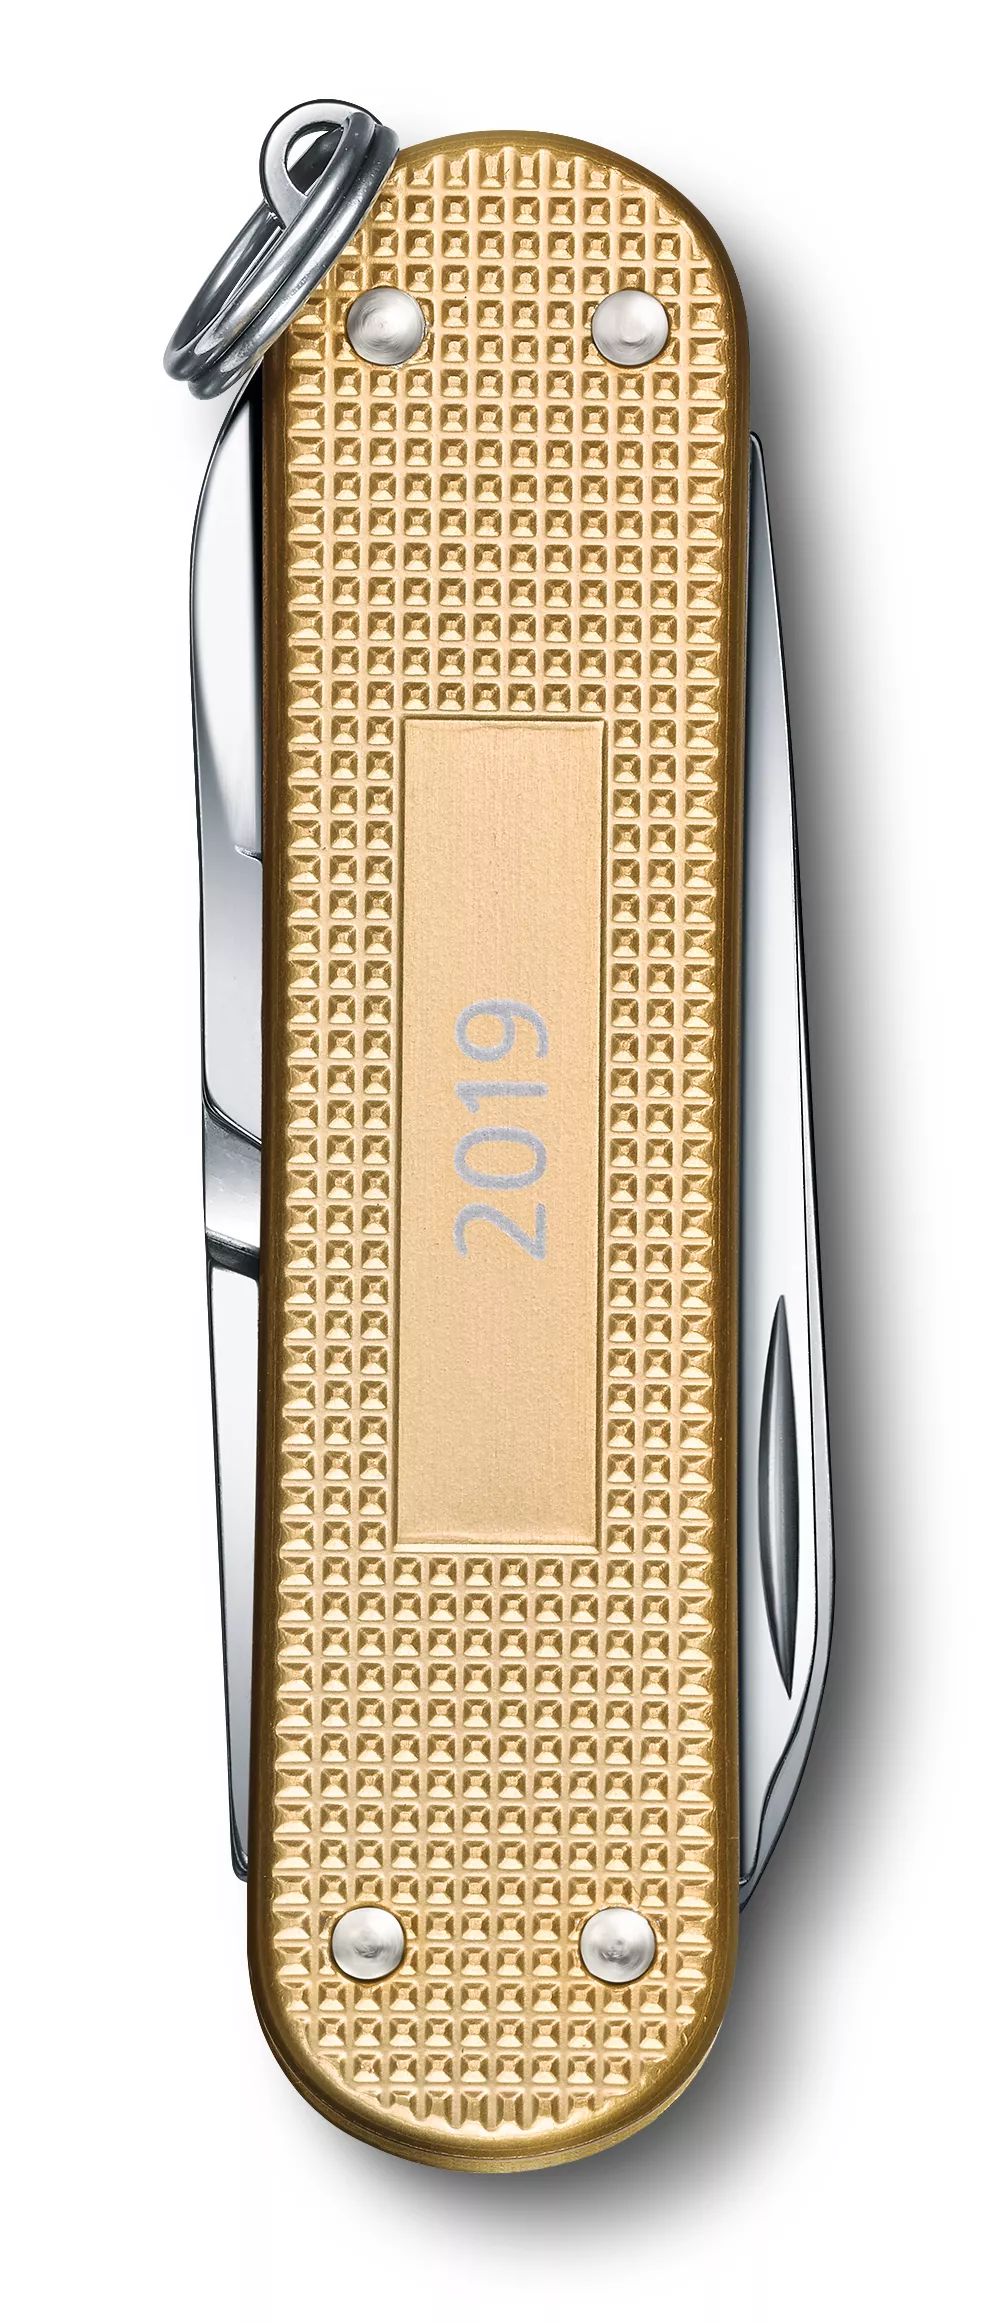 Victorinox Classic Alox Limited Edition 2019 in gold - 0.6221.L19